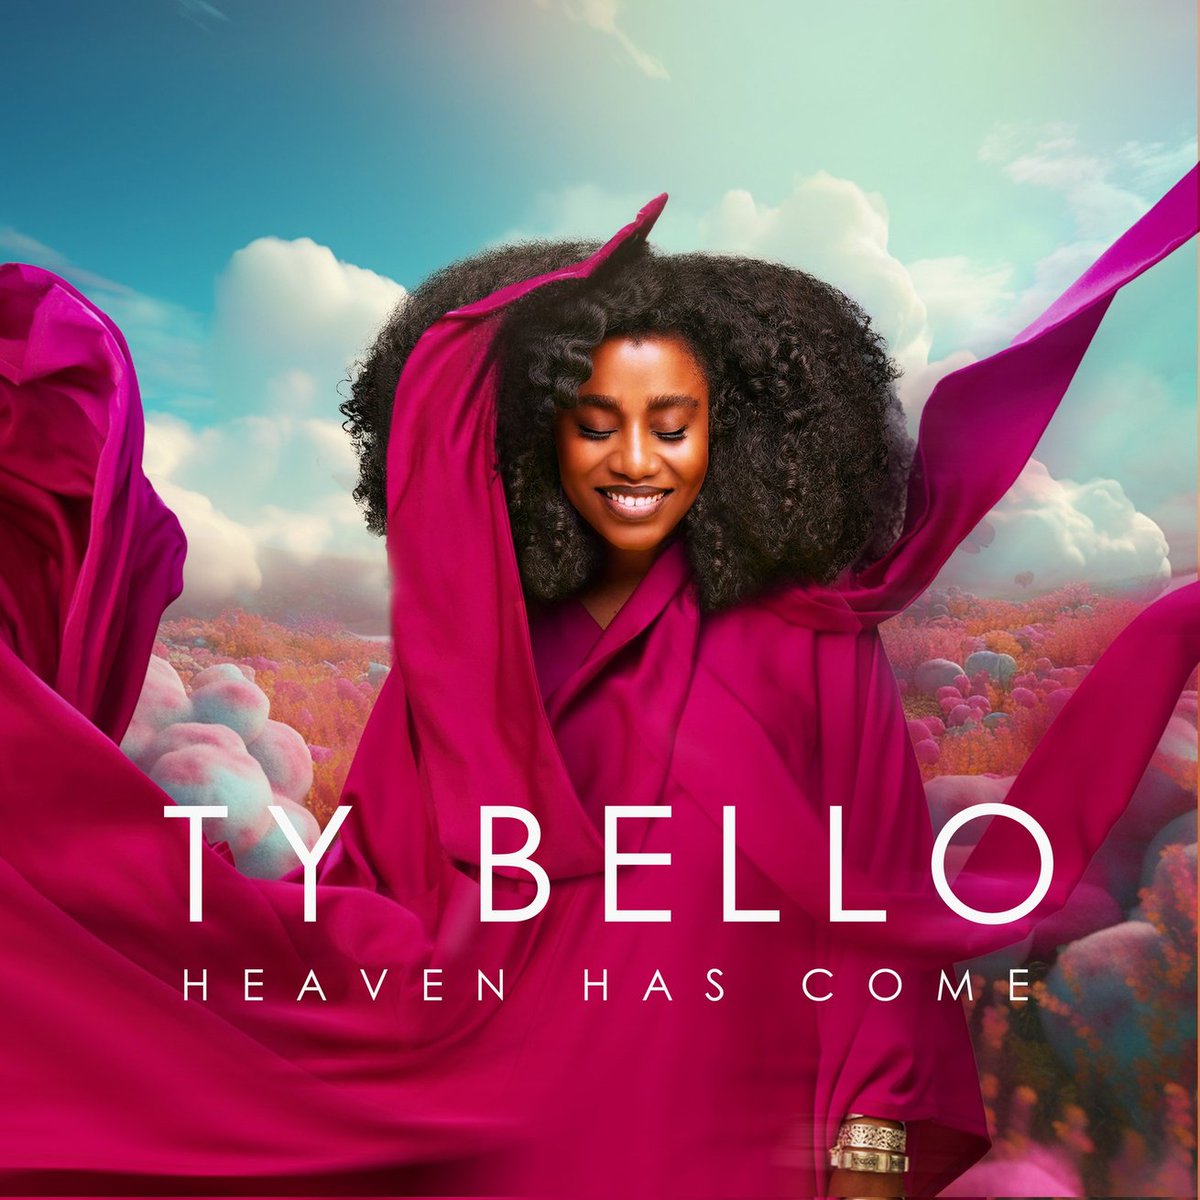 Our #SongoftheWeek is 'That's My Name' by @tybellotweets ft. @gaisebaba ft. @itsAngeloh

Fresh out of 'Heaven Has Come' album. It assures us that God loves us. 

You are loved by God; that's your name.

Update your playlist and enjoy💃

#ChristocentricRadio #Wearetheyellowtribe